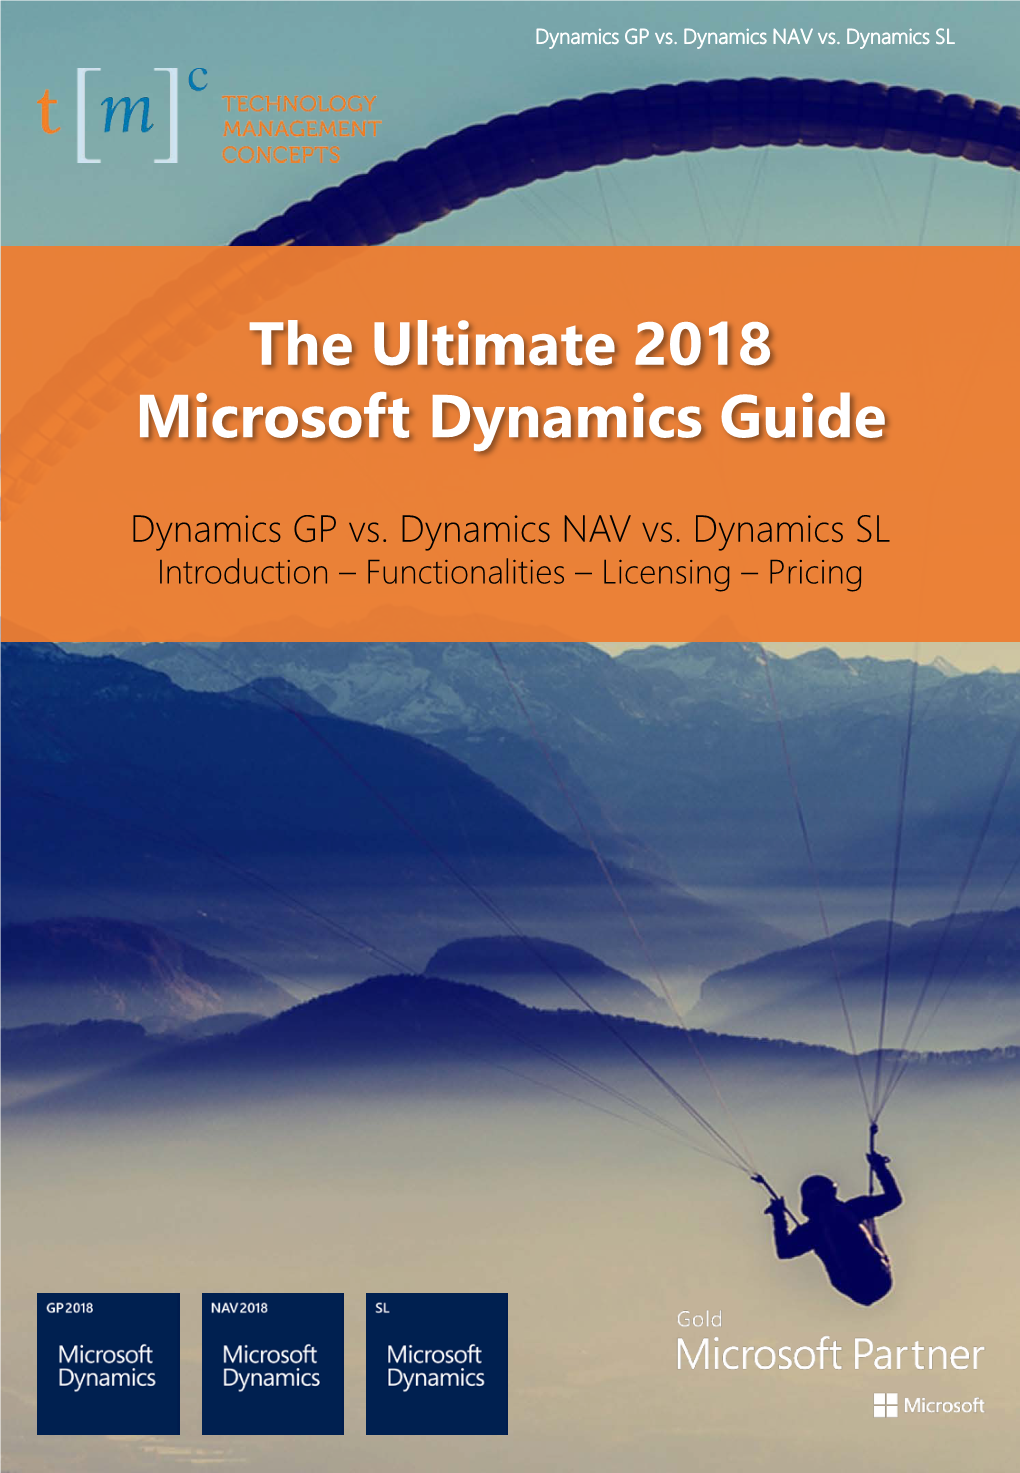 The Ultimate 2018 Microsoft Dynamics Guide